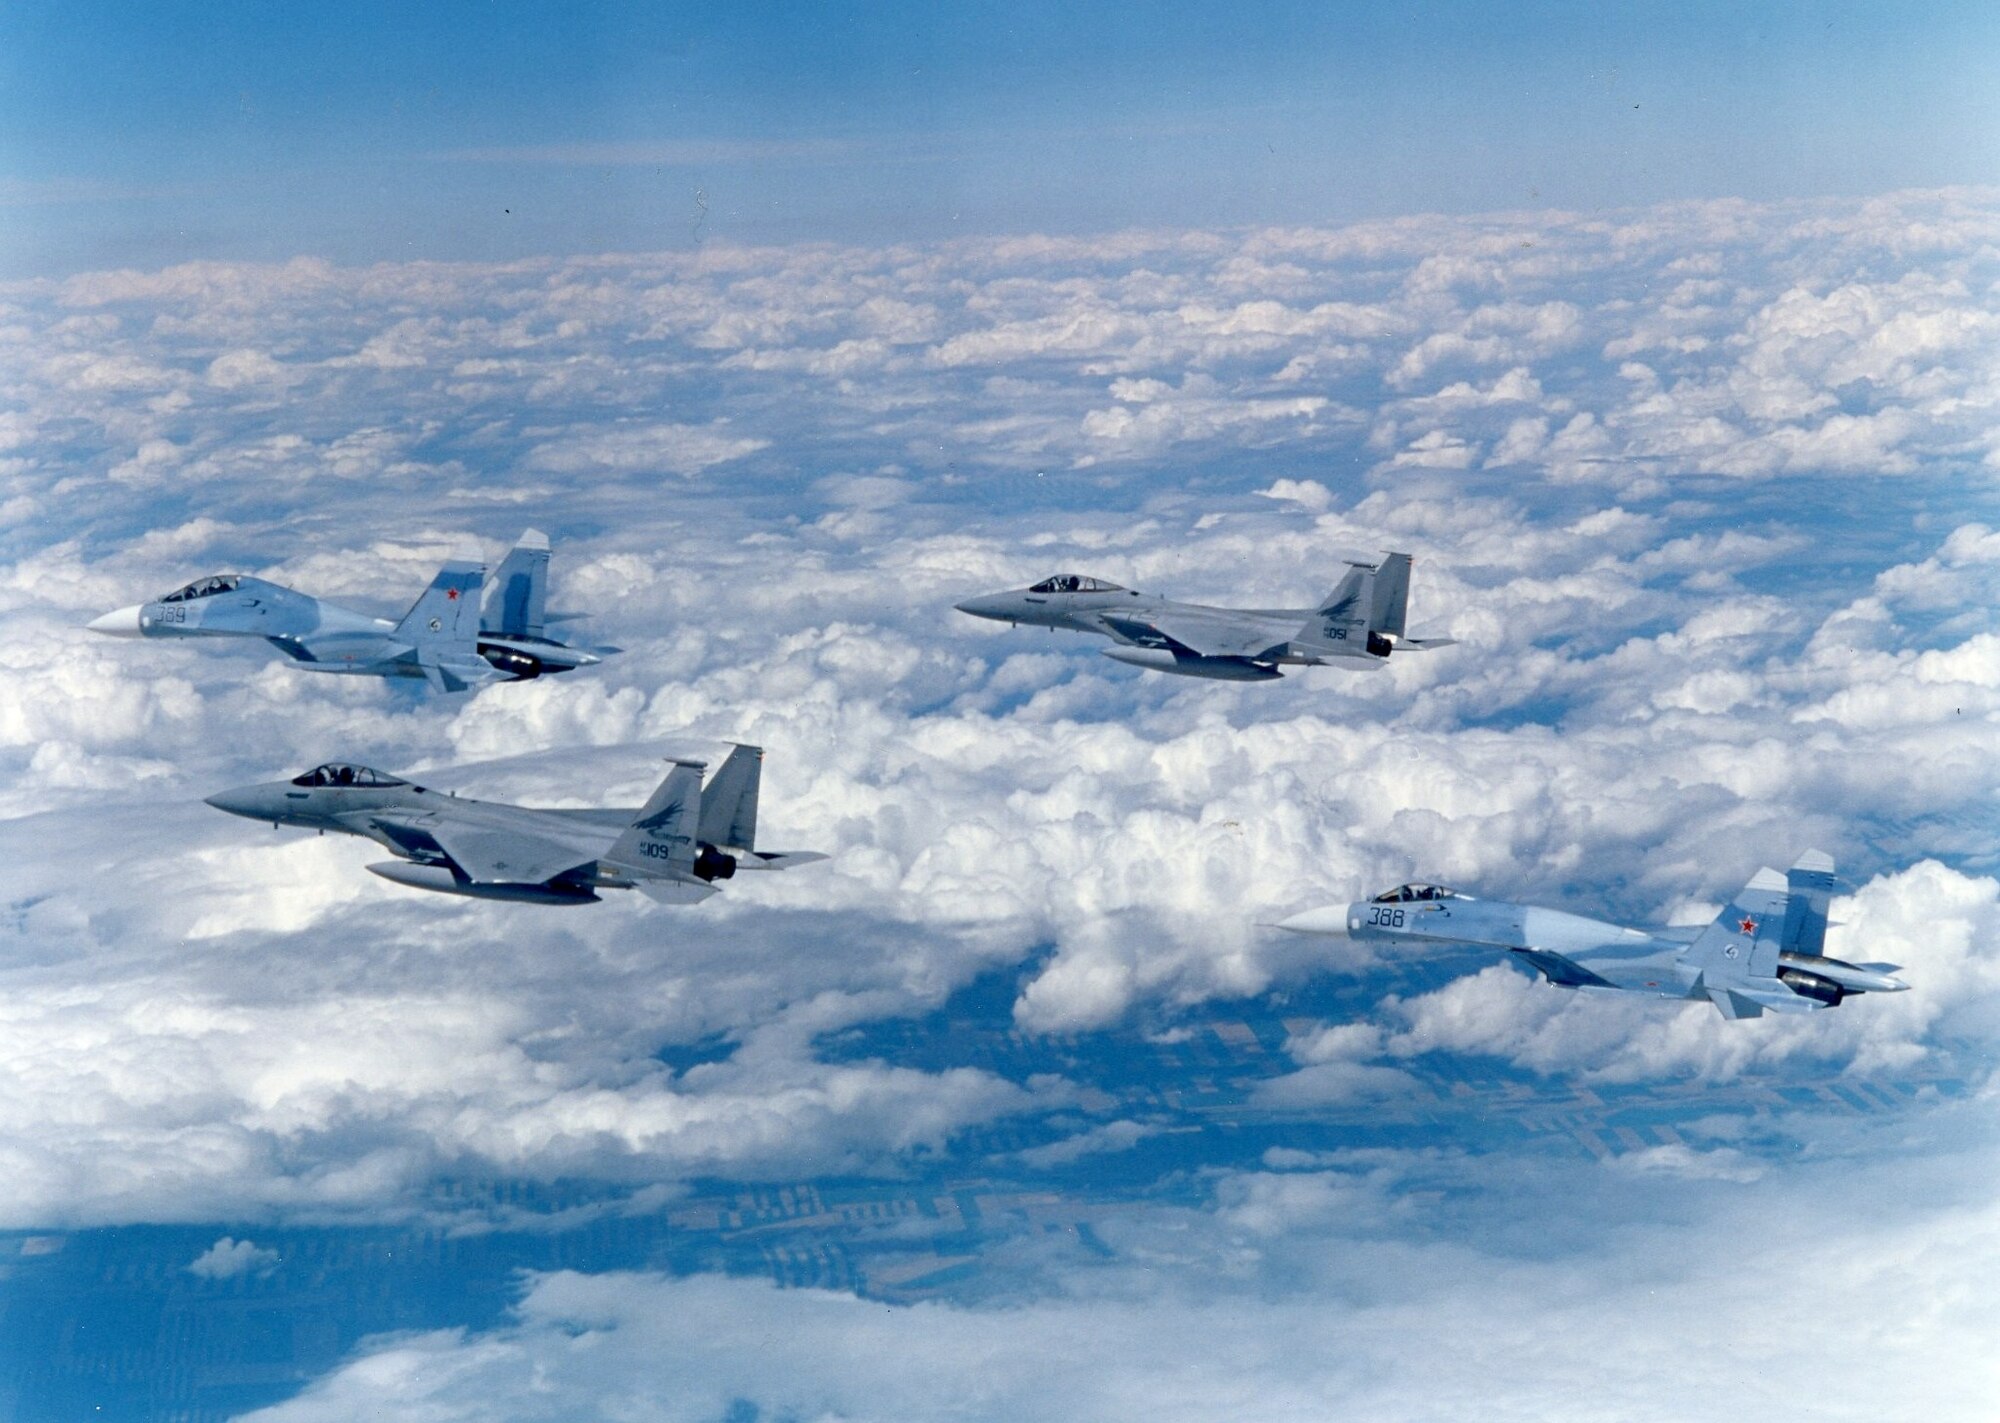 A New Bird in the Oregon Roost:The Beginning of the Eagle Era in the 142nd Fighter Wing